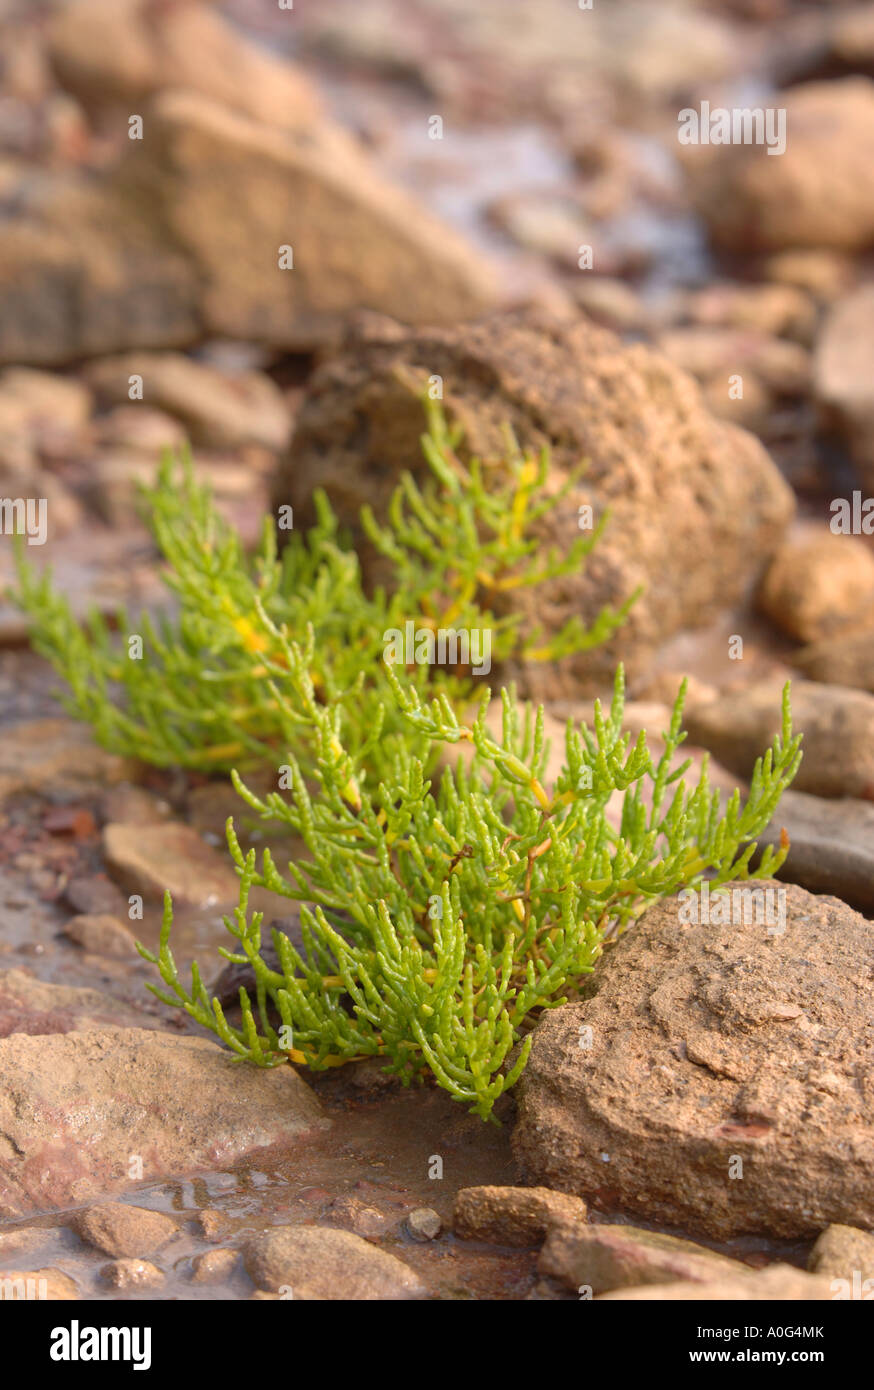 THE EDIBLE SEA WEED SAMPHIRE ON THE BANKS OF THE RIVER SEVERN Stock Photo